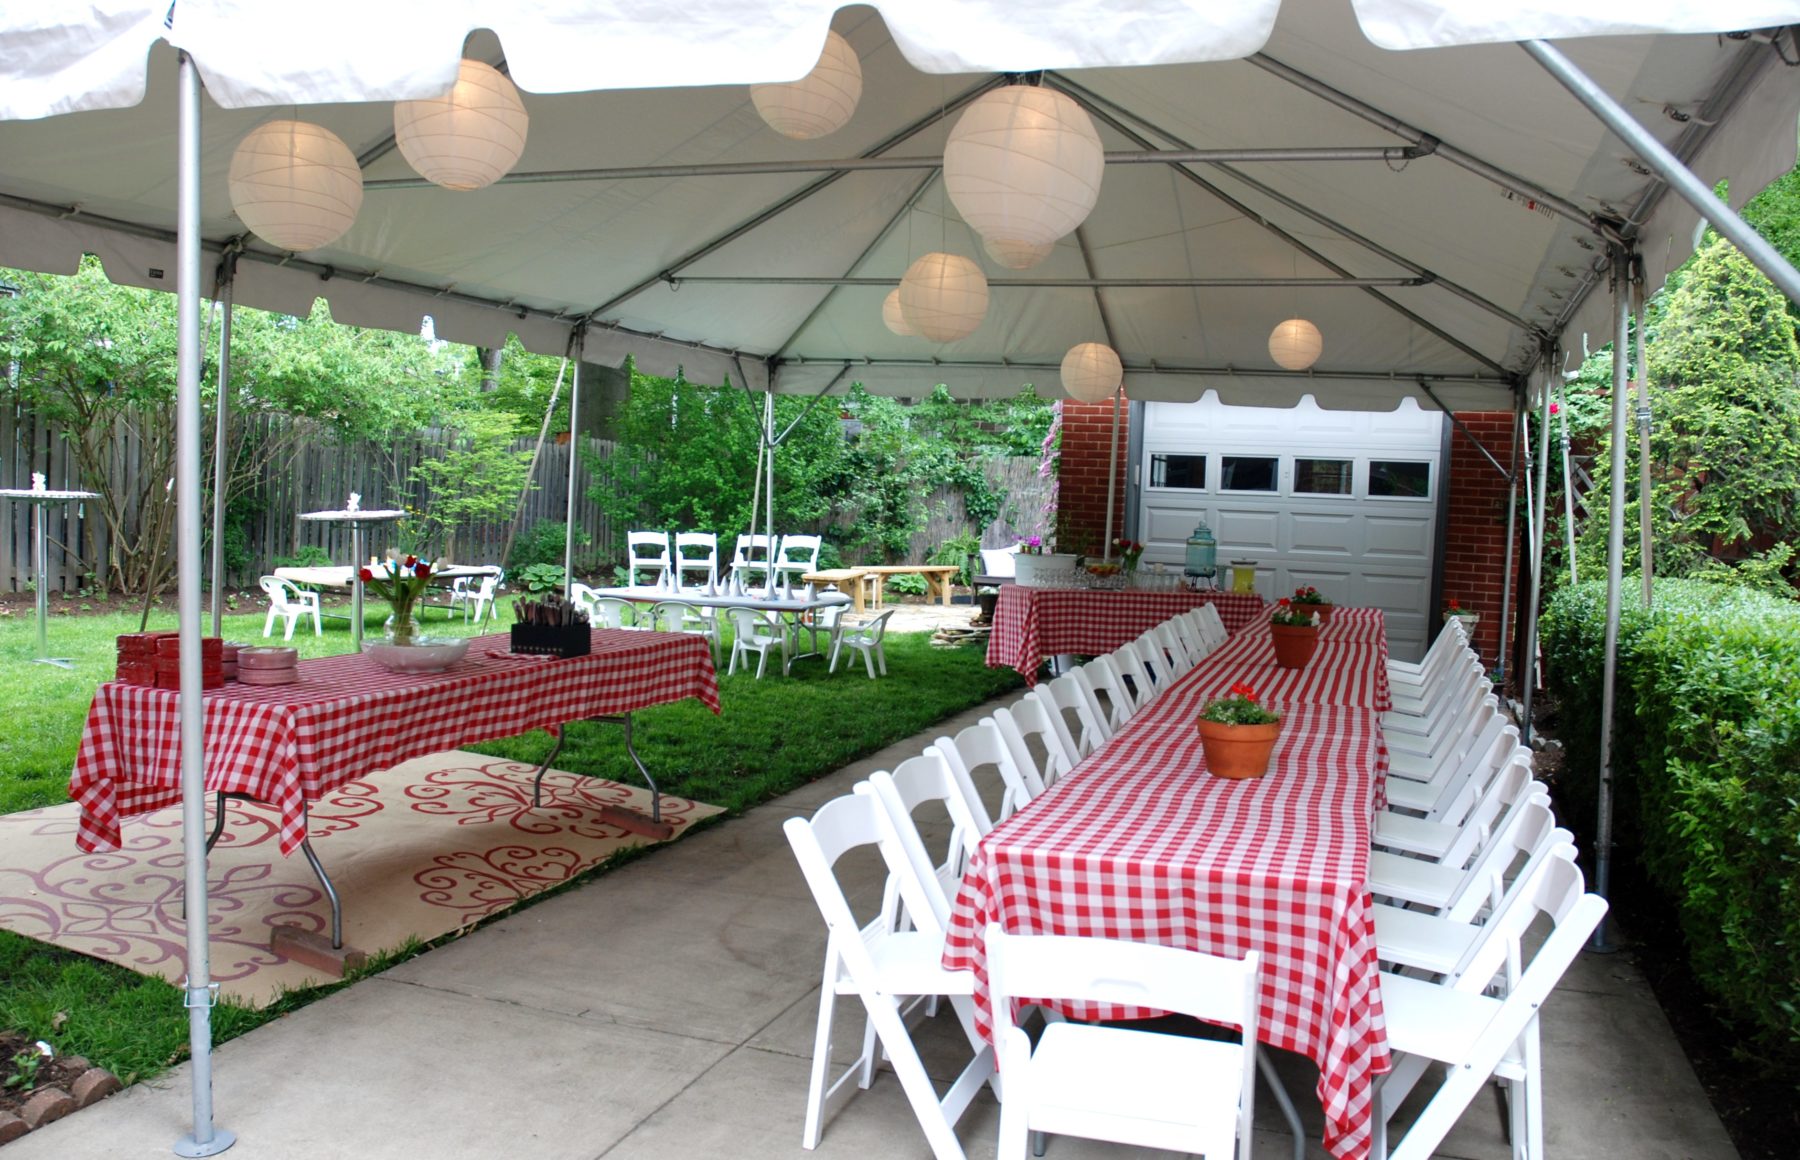 16' by 16' Party Canopy and Frame Tent Layouts ...